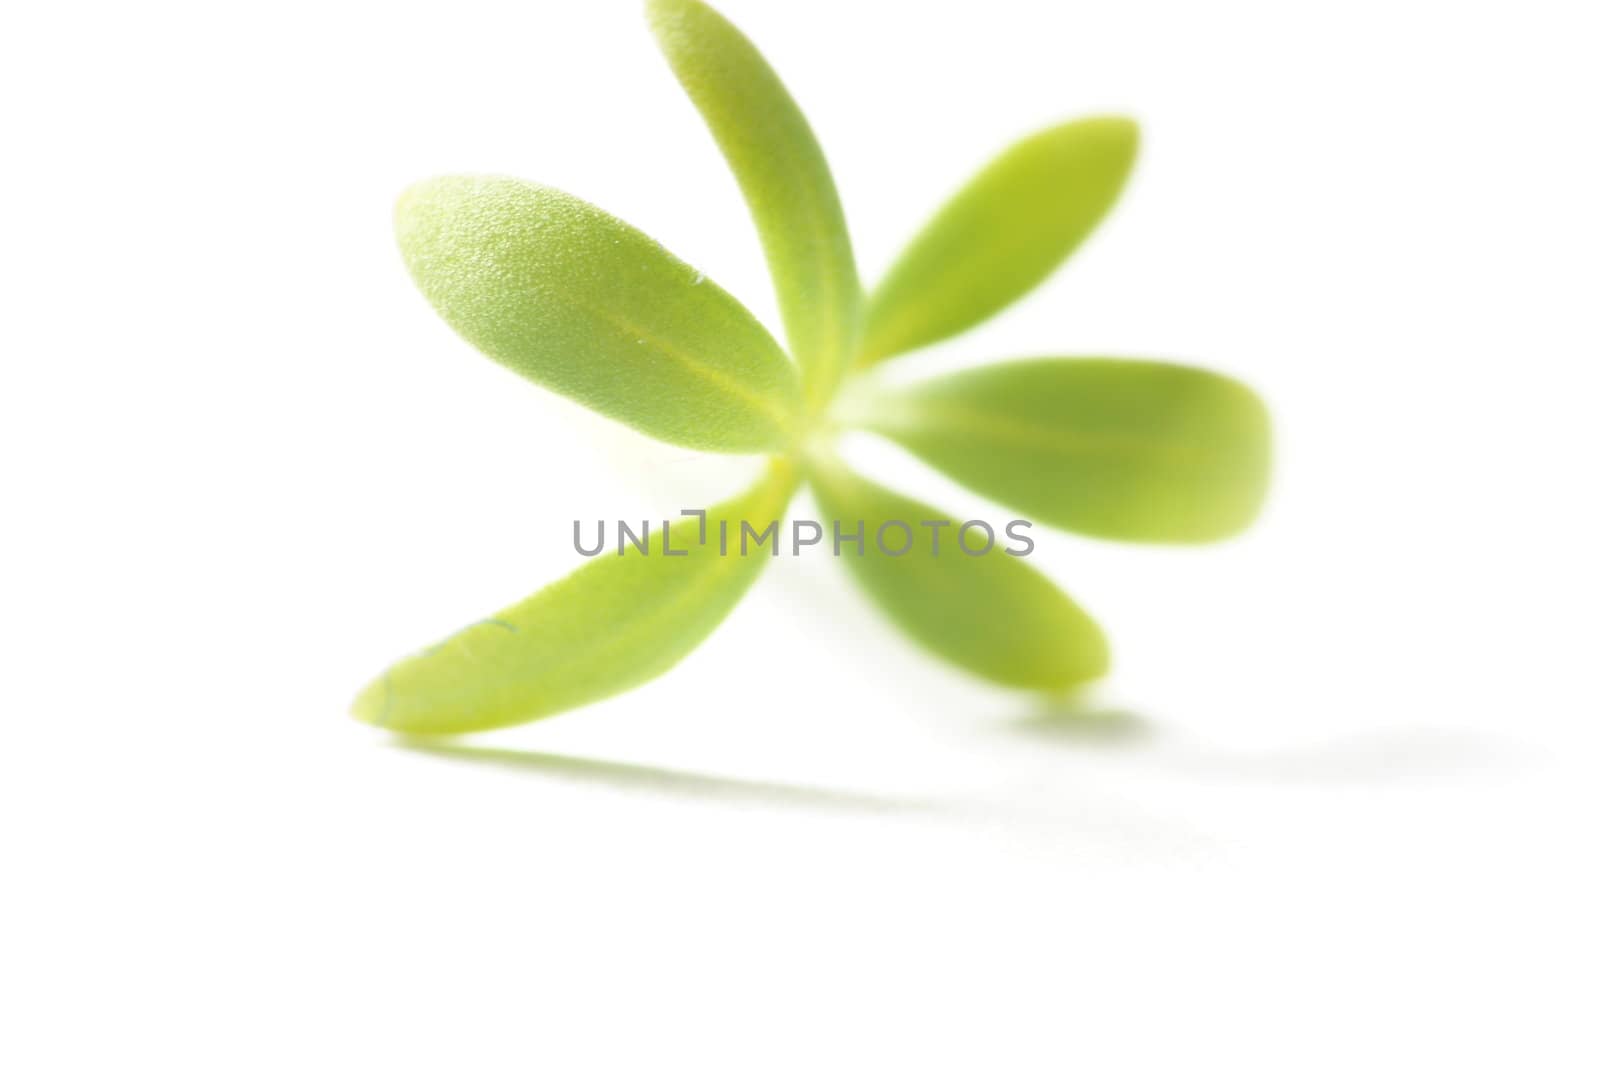 Cress close-up on white background